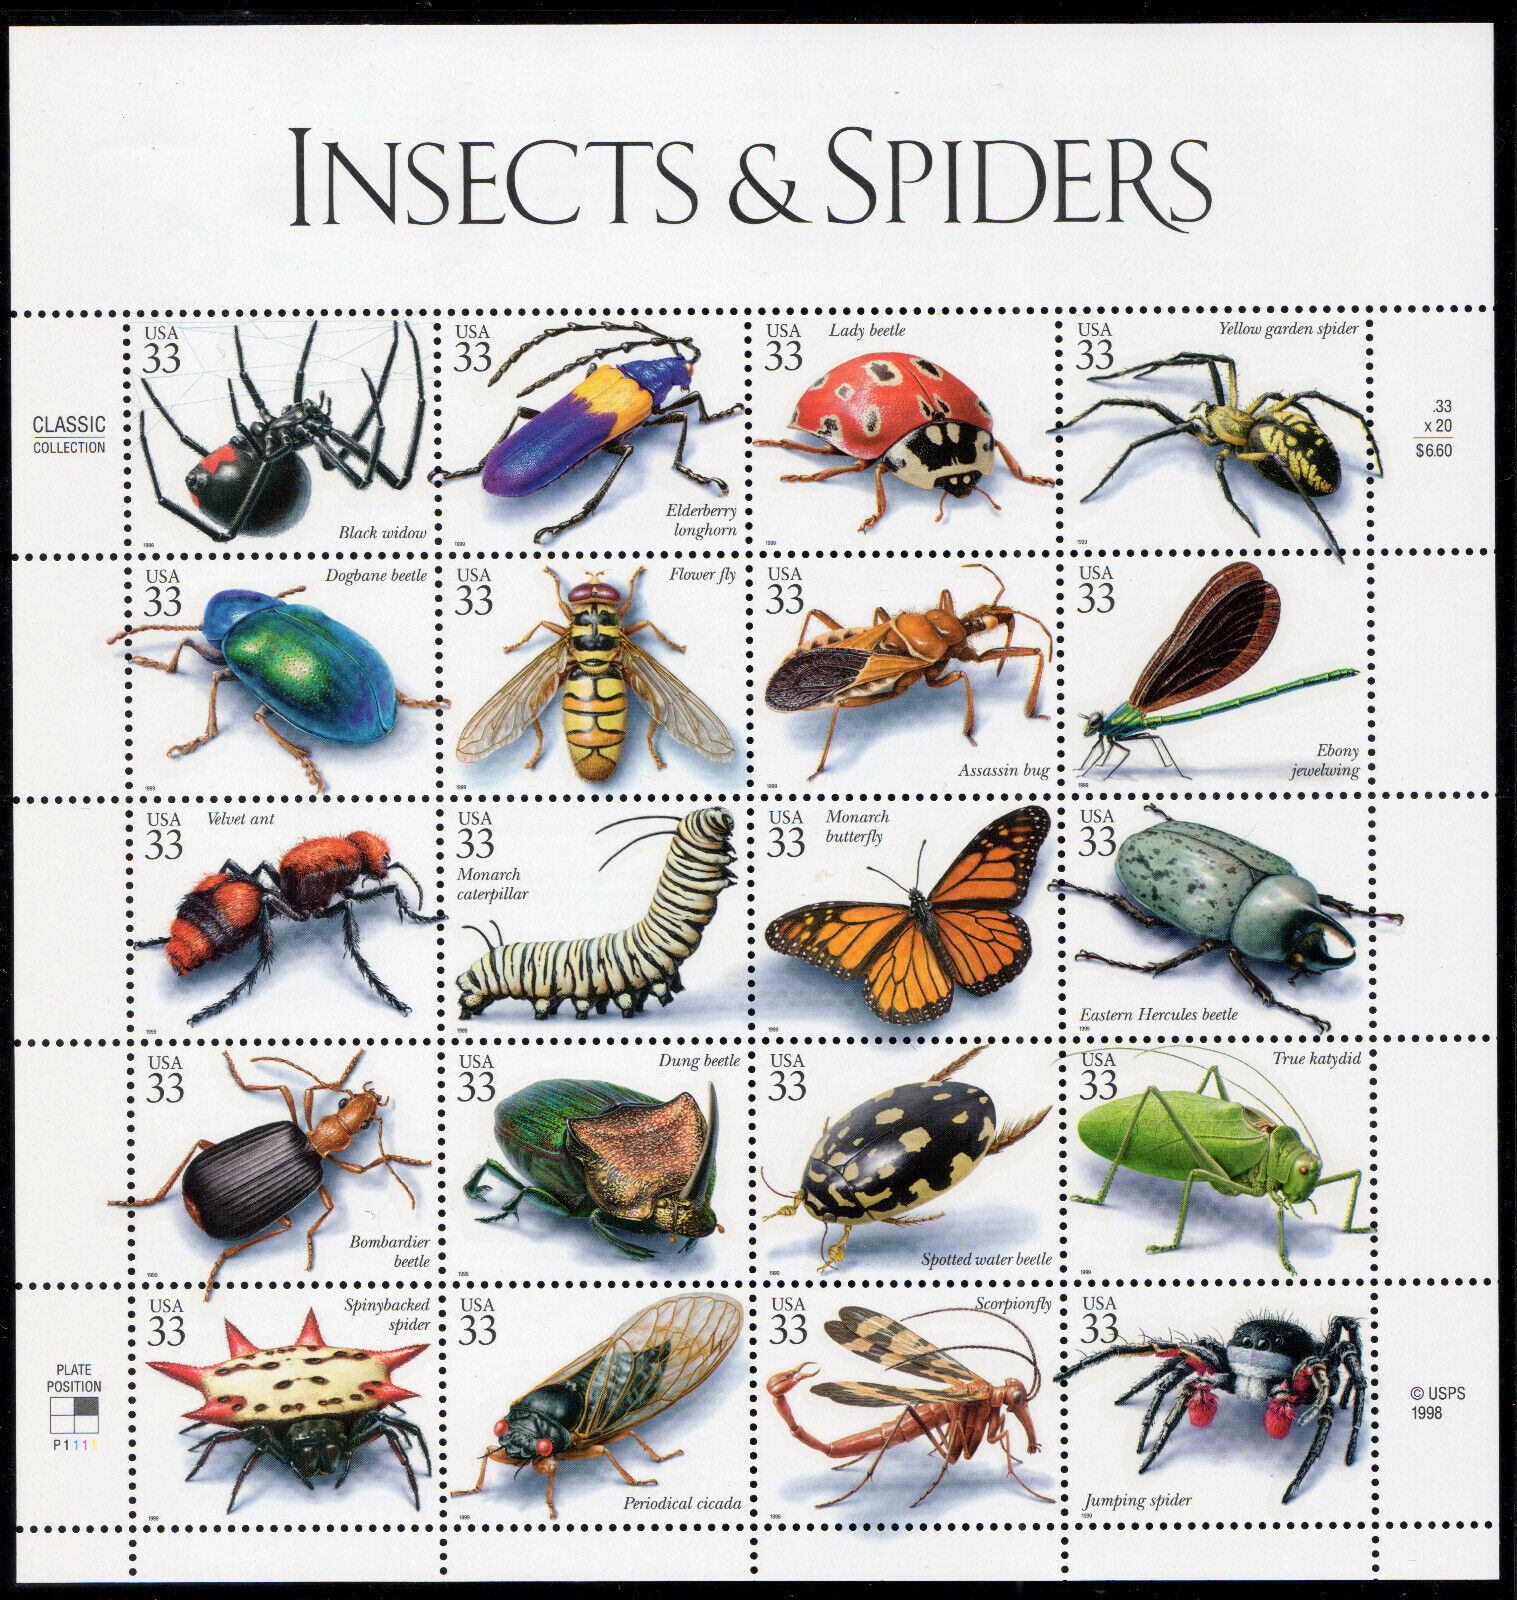 1999 Us Sc 3351 33c Insects & Spiders Full Sheet Of 20 - Mnh Post Office Fresh